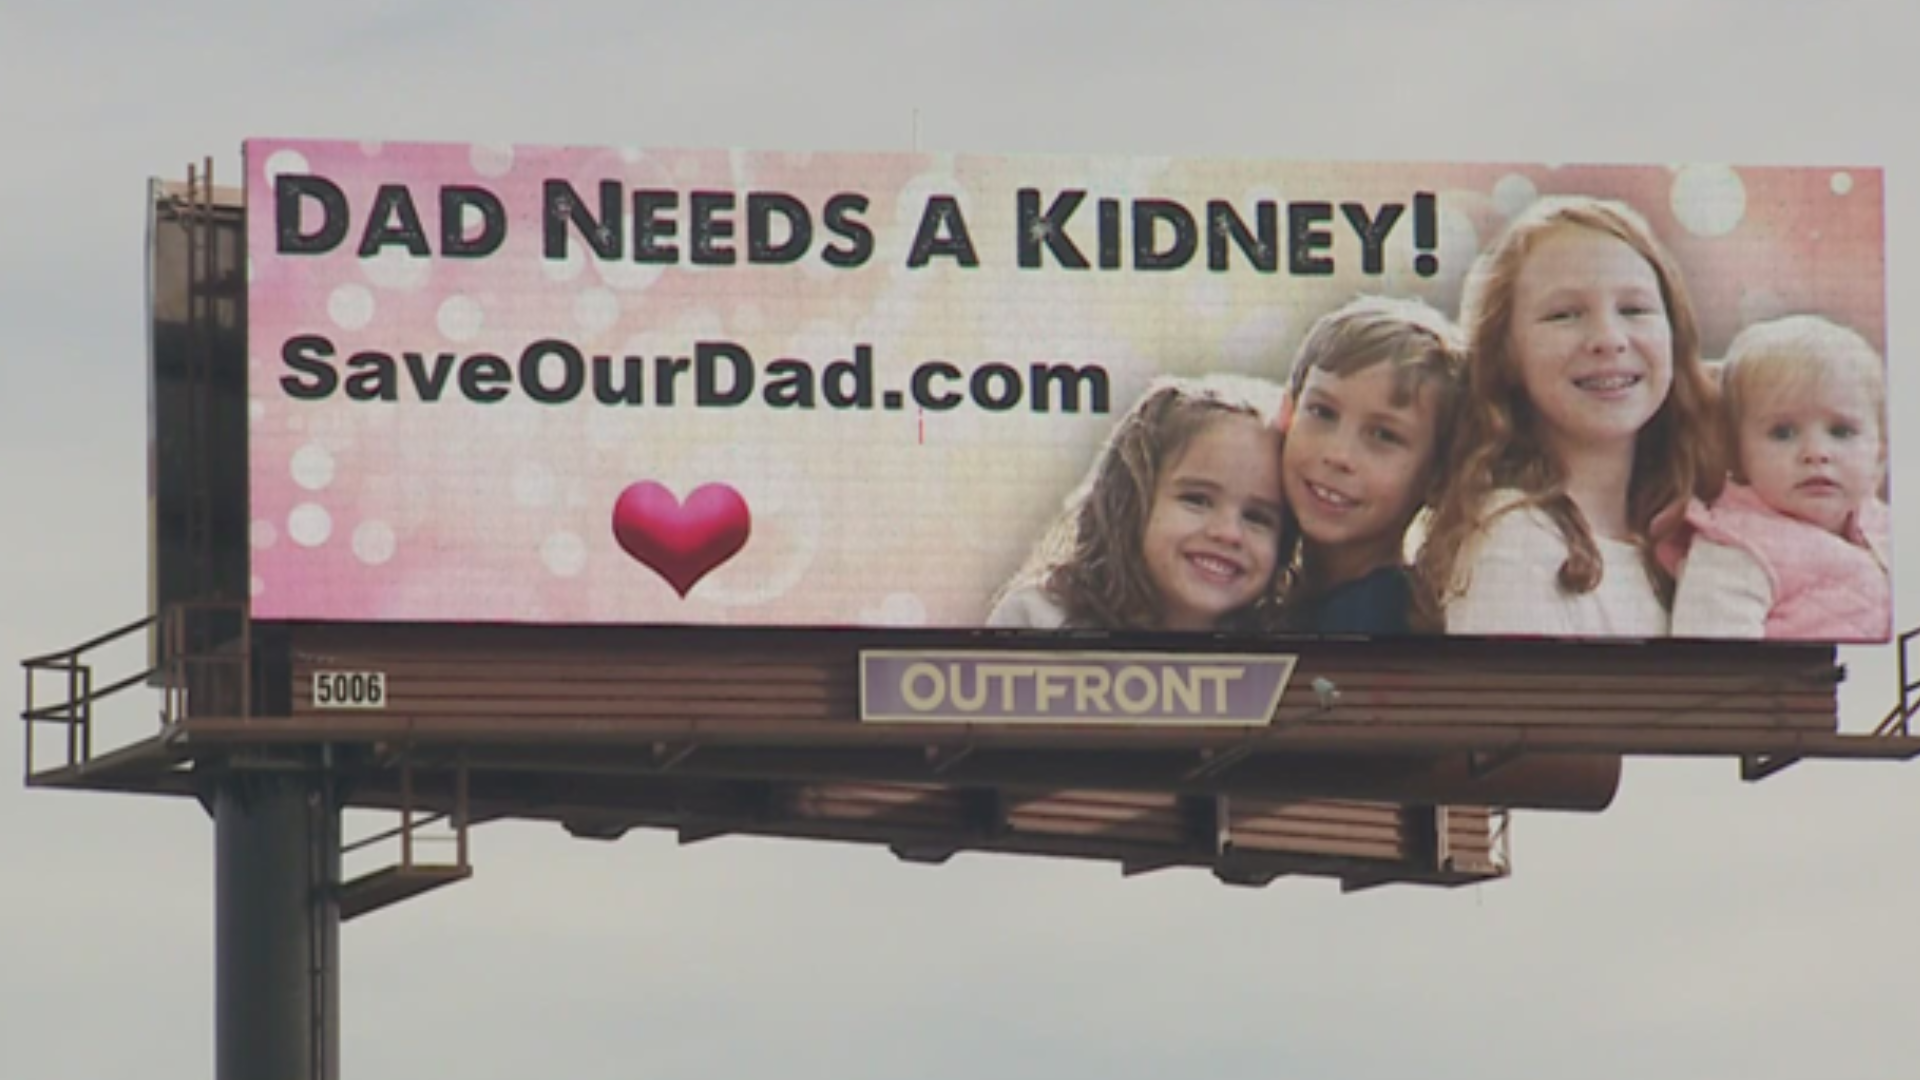 Our Dad Needs a Kidney